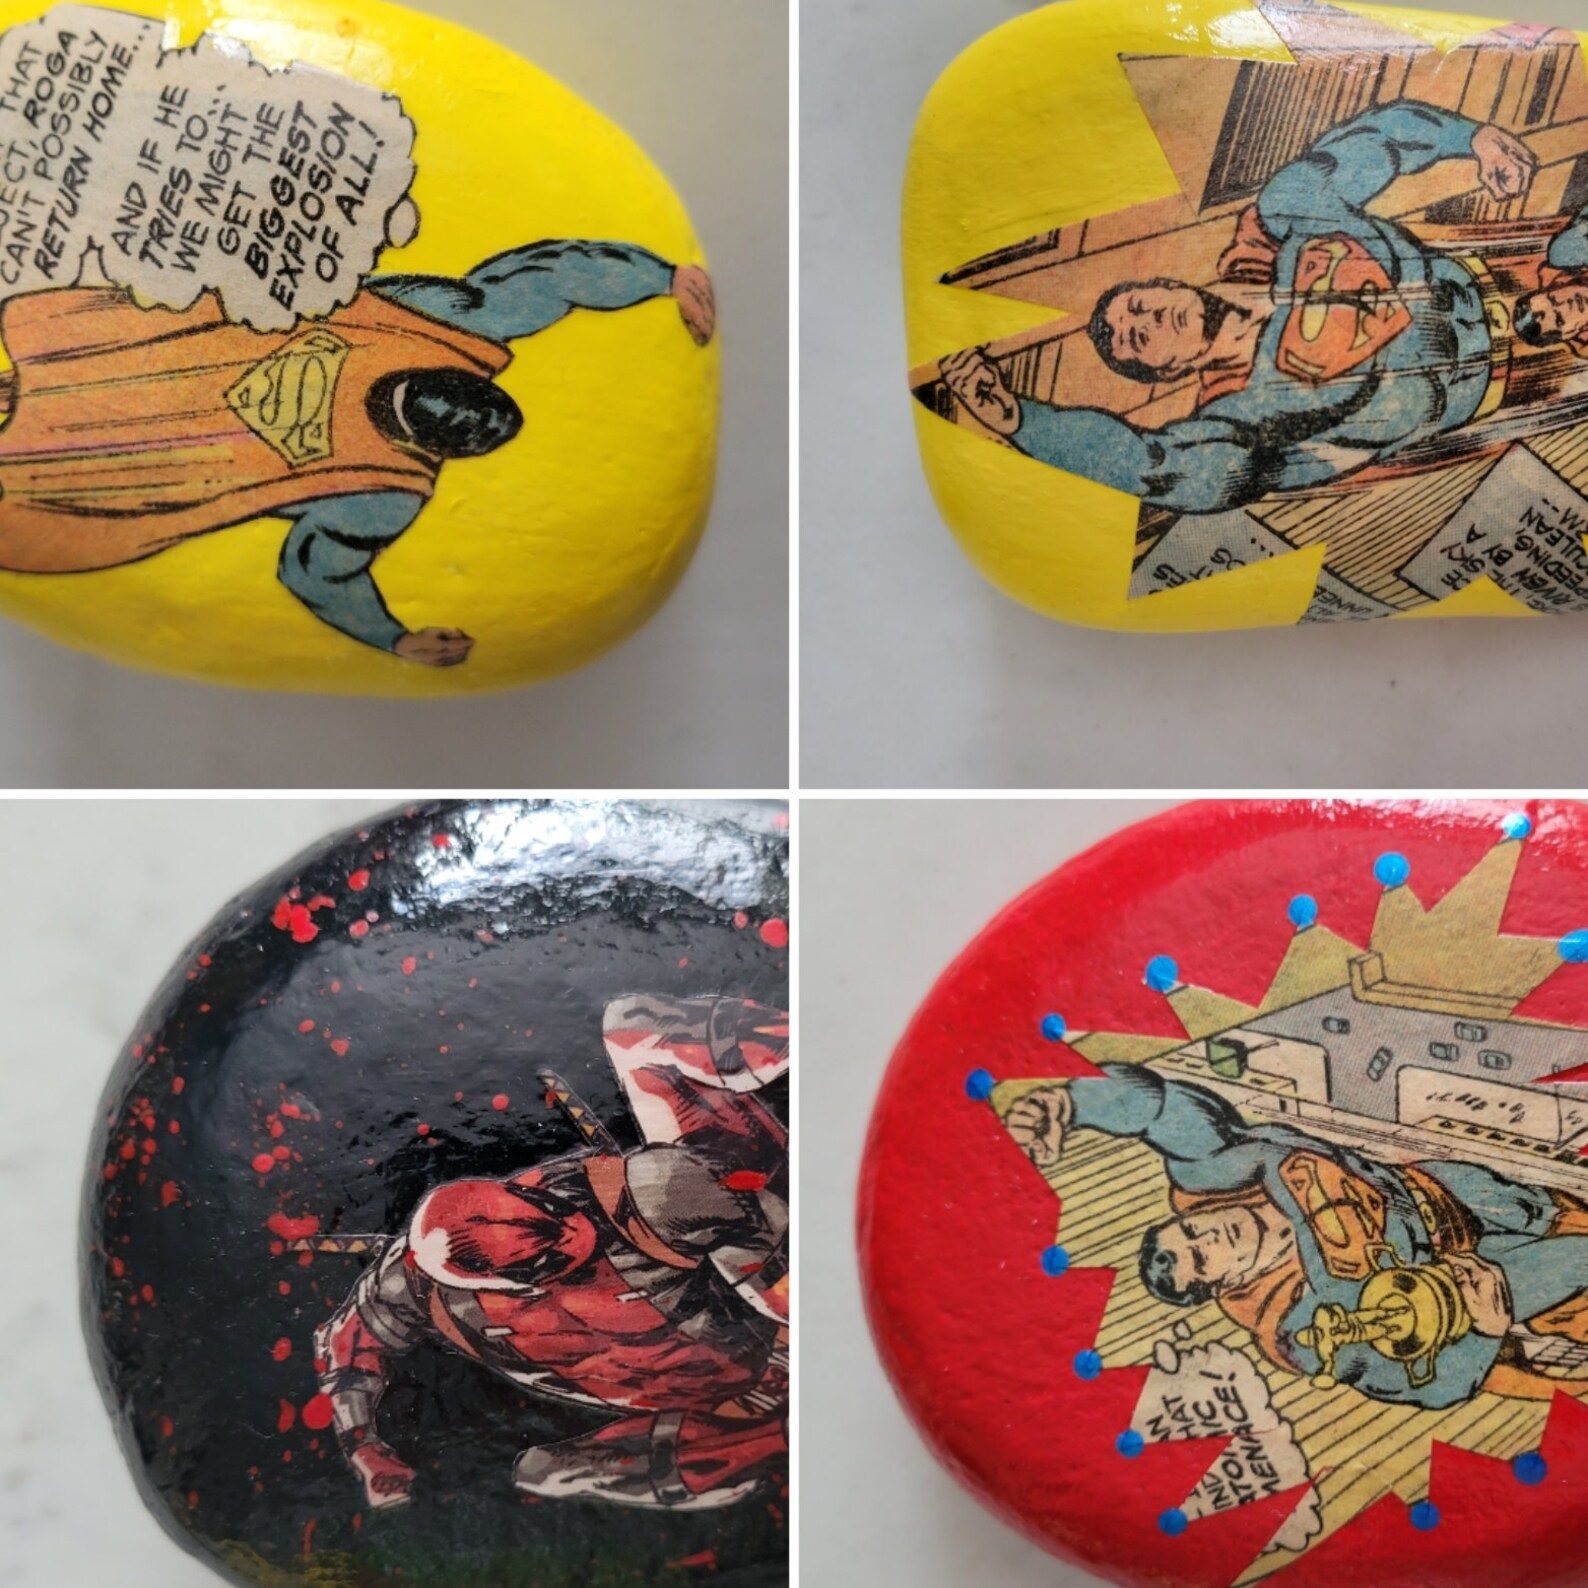 Four paperweights made from painted rocks with images from old superhero comics applied on top